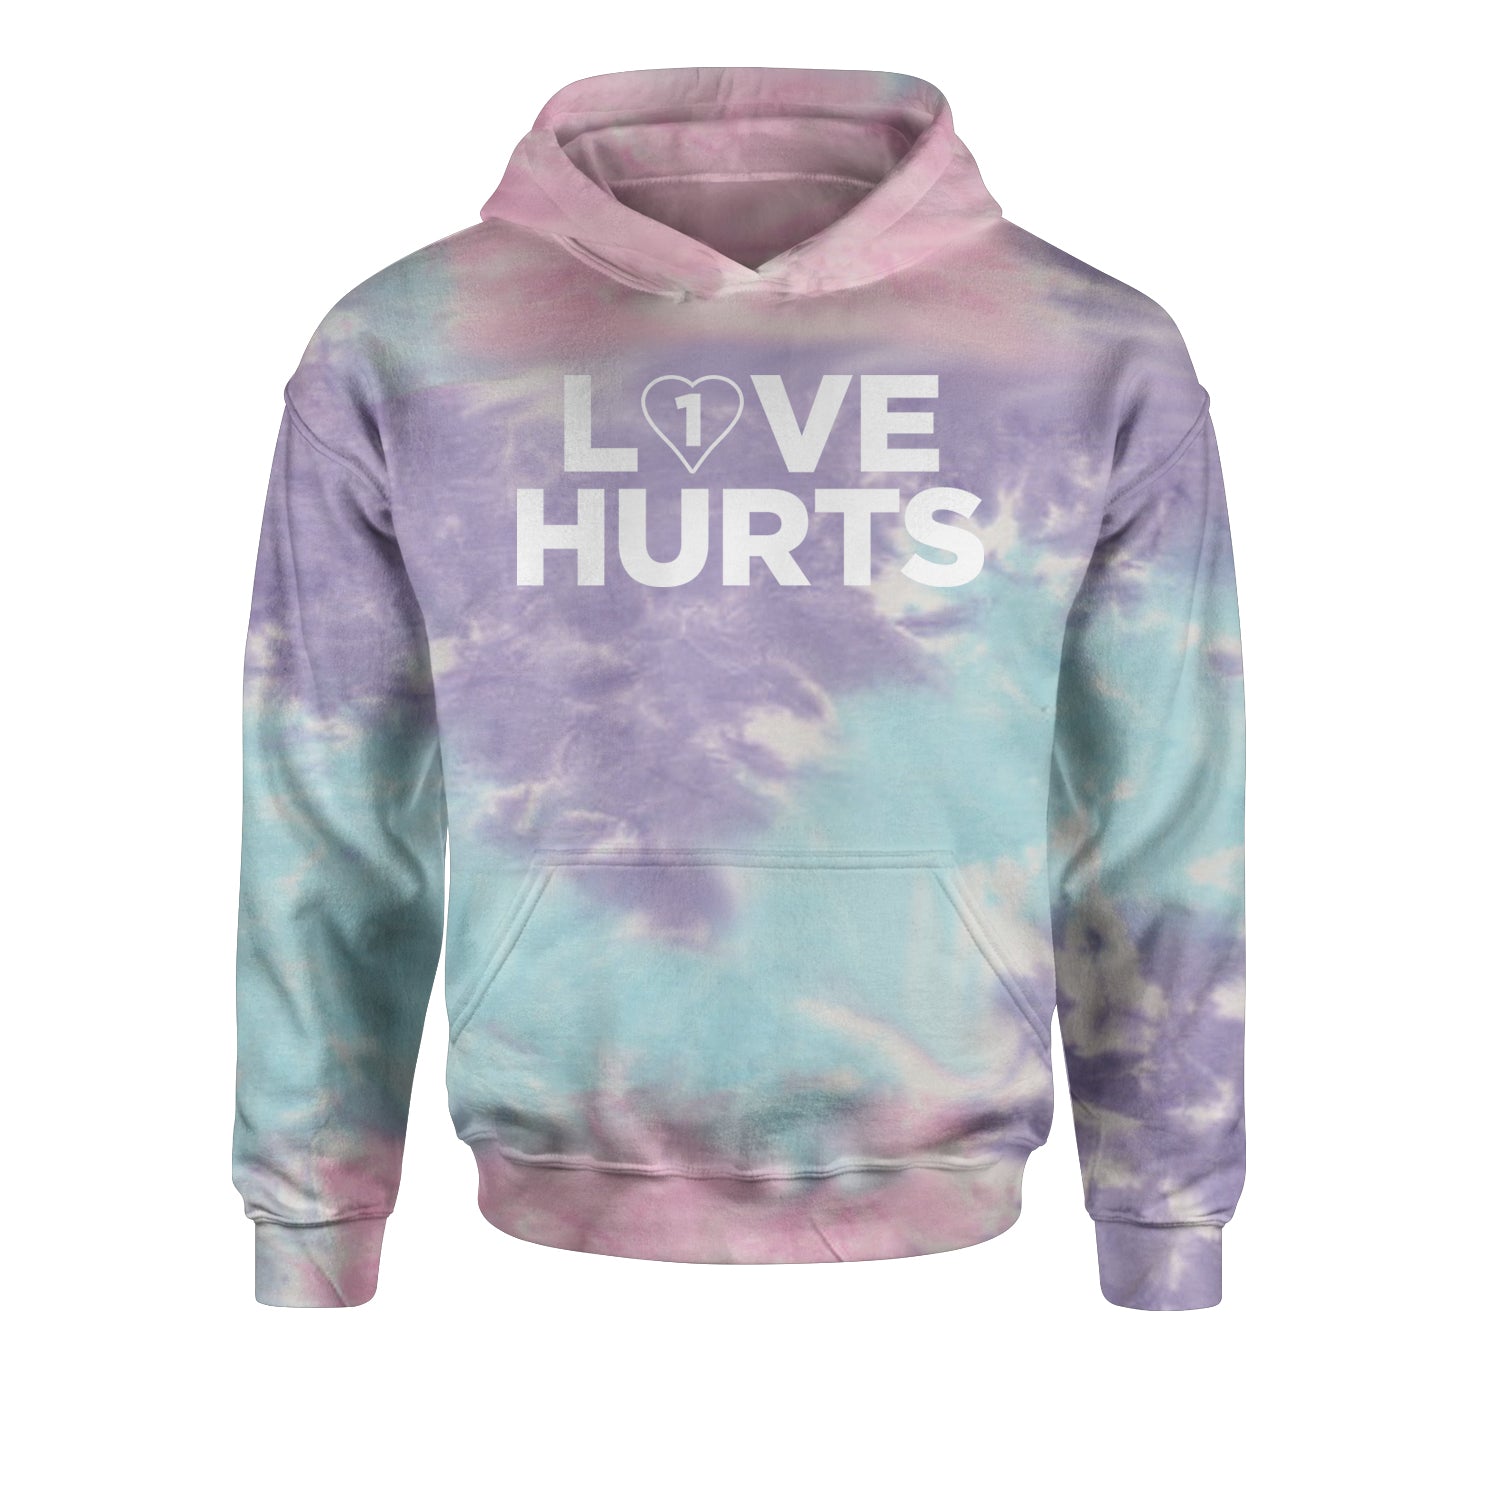 Love Hurts Philadelphia Youth-Sized Hoodie birds, football, go, philly by Expression Tees